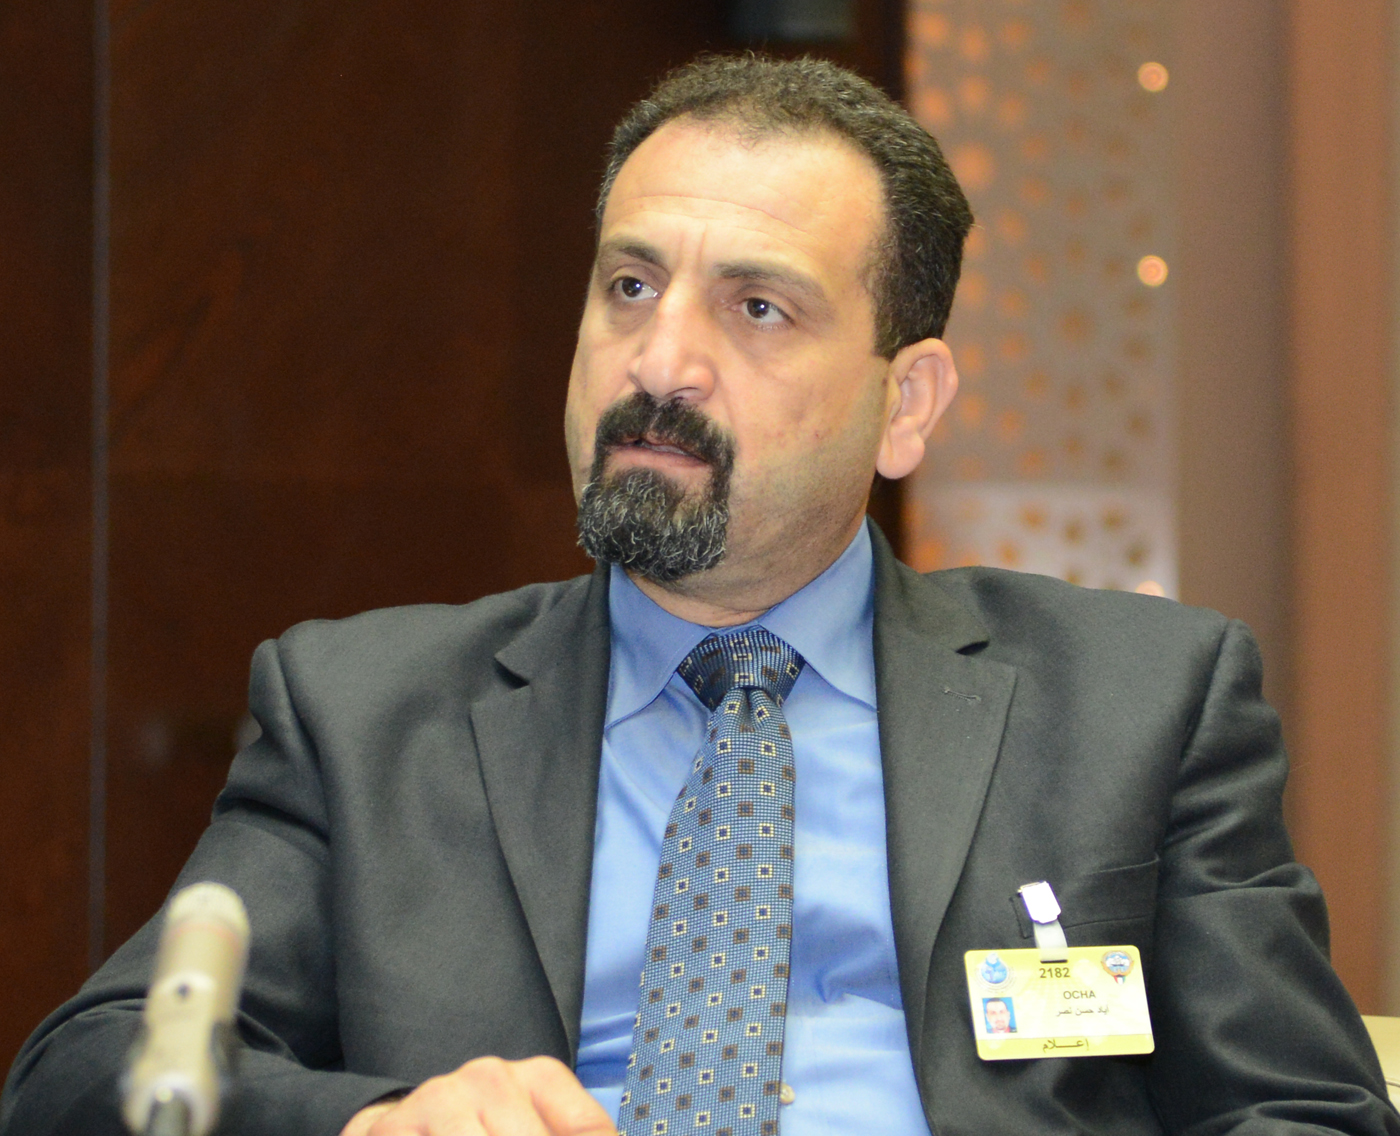 the UN Office for the Coordination of Humanitarian Affairs (OCHA) spokesperson Ayad Hassan